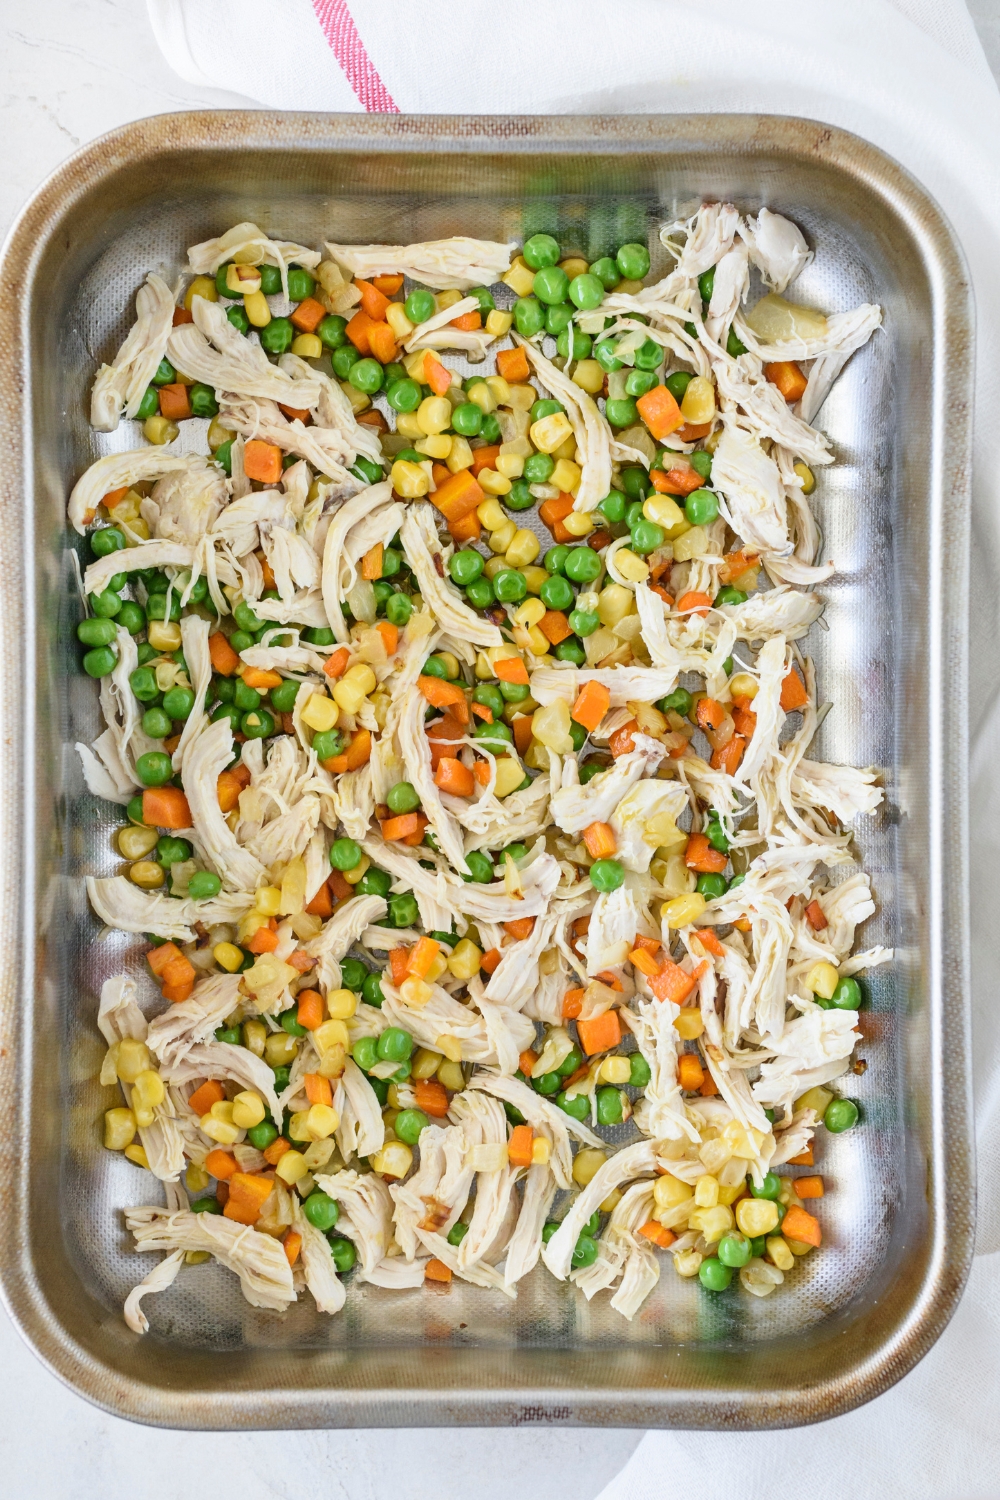 A rectangular baking dish filled with corn kernels, diced carrots, peas, and shredded chicken spread in an even layer along the bottom of the dish.